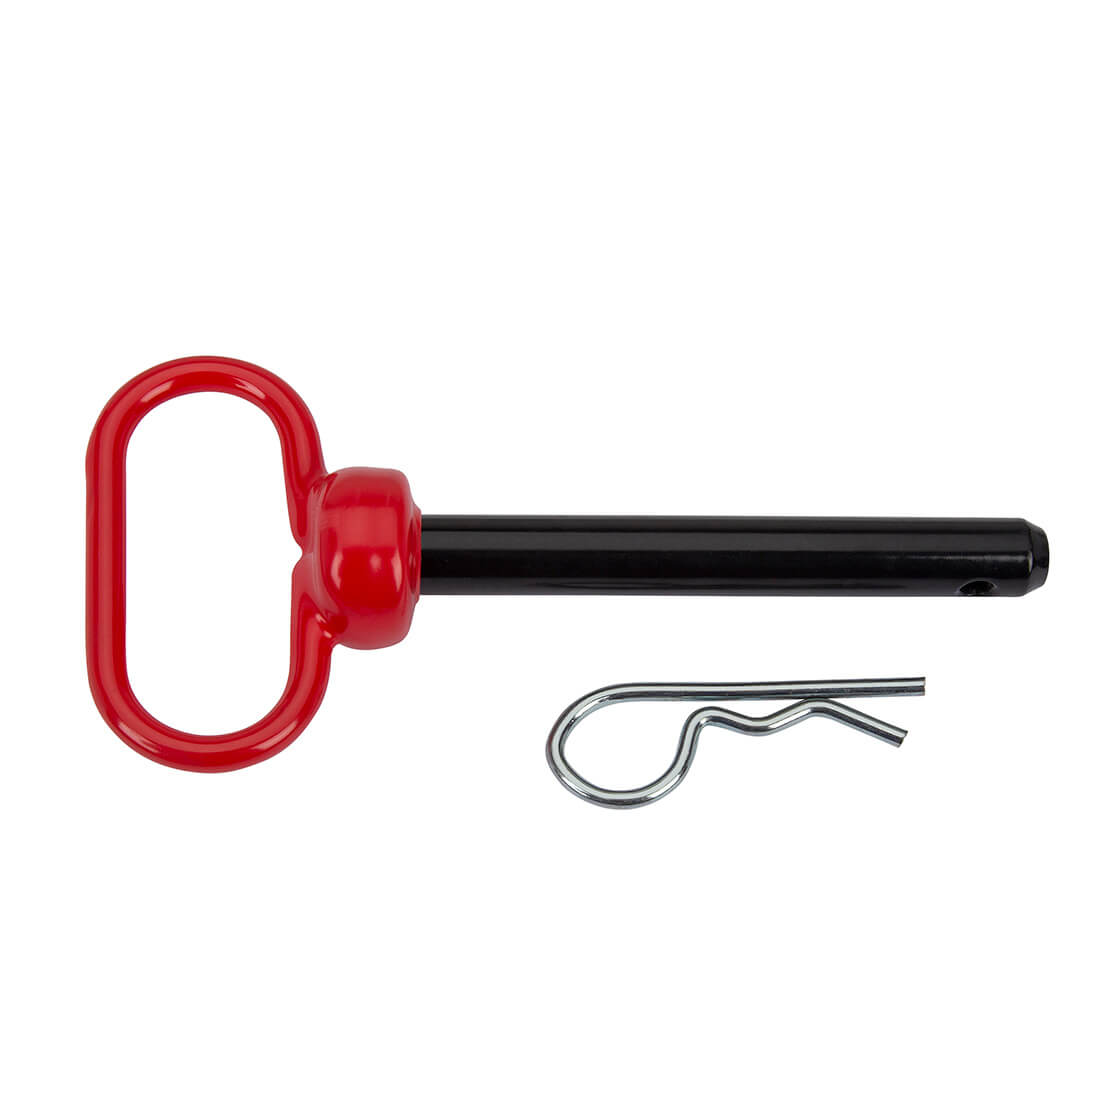 5/8 in. x 7 in. Hitch Pin - TowSmart